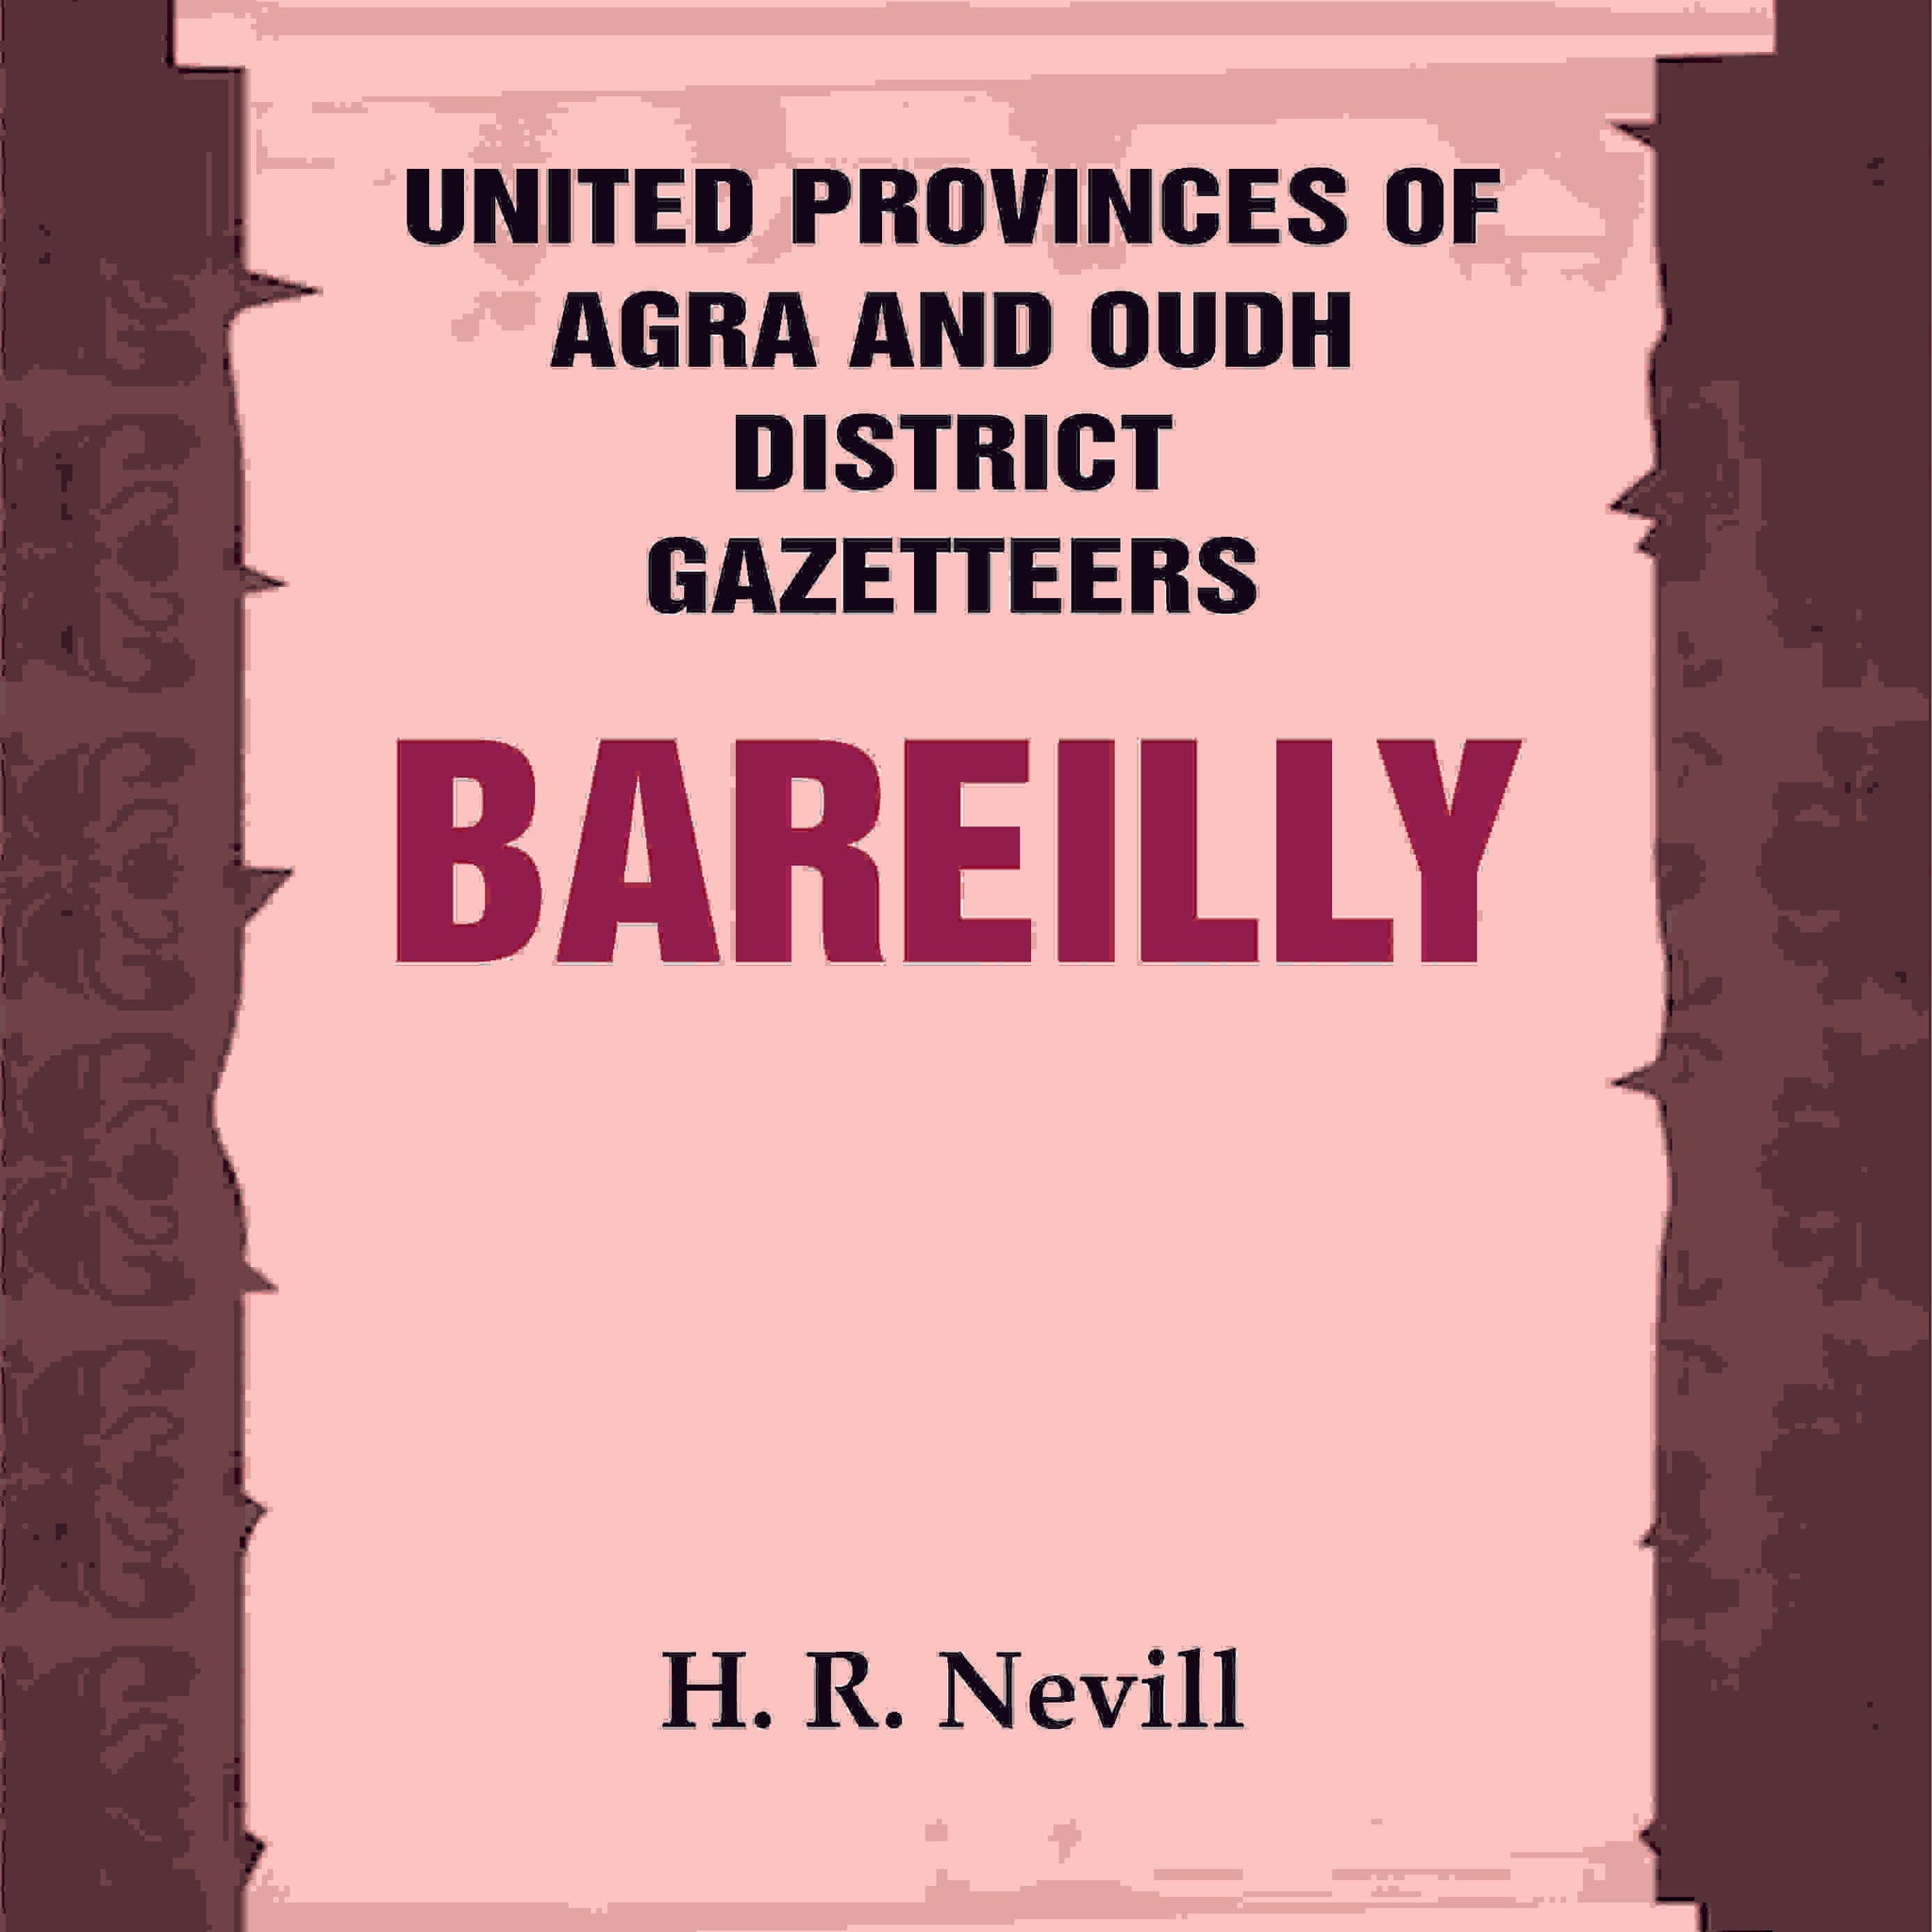 United Provinces of Agra and Oudh District Gazetteers: Bareilly